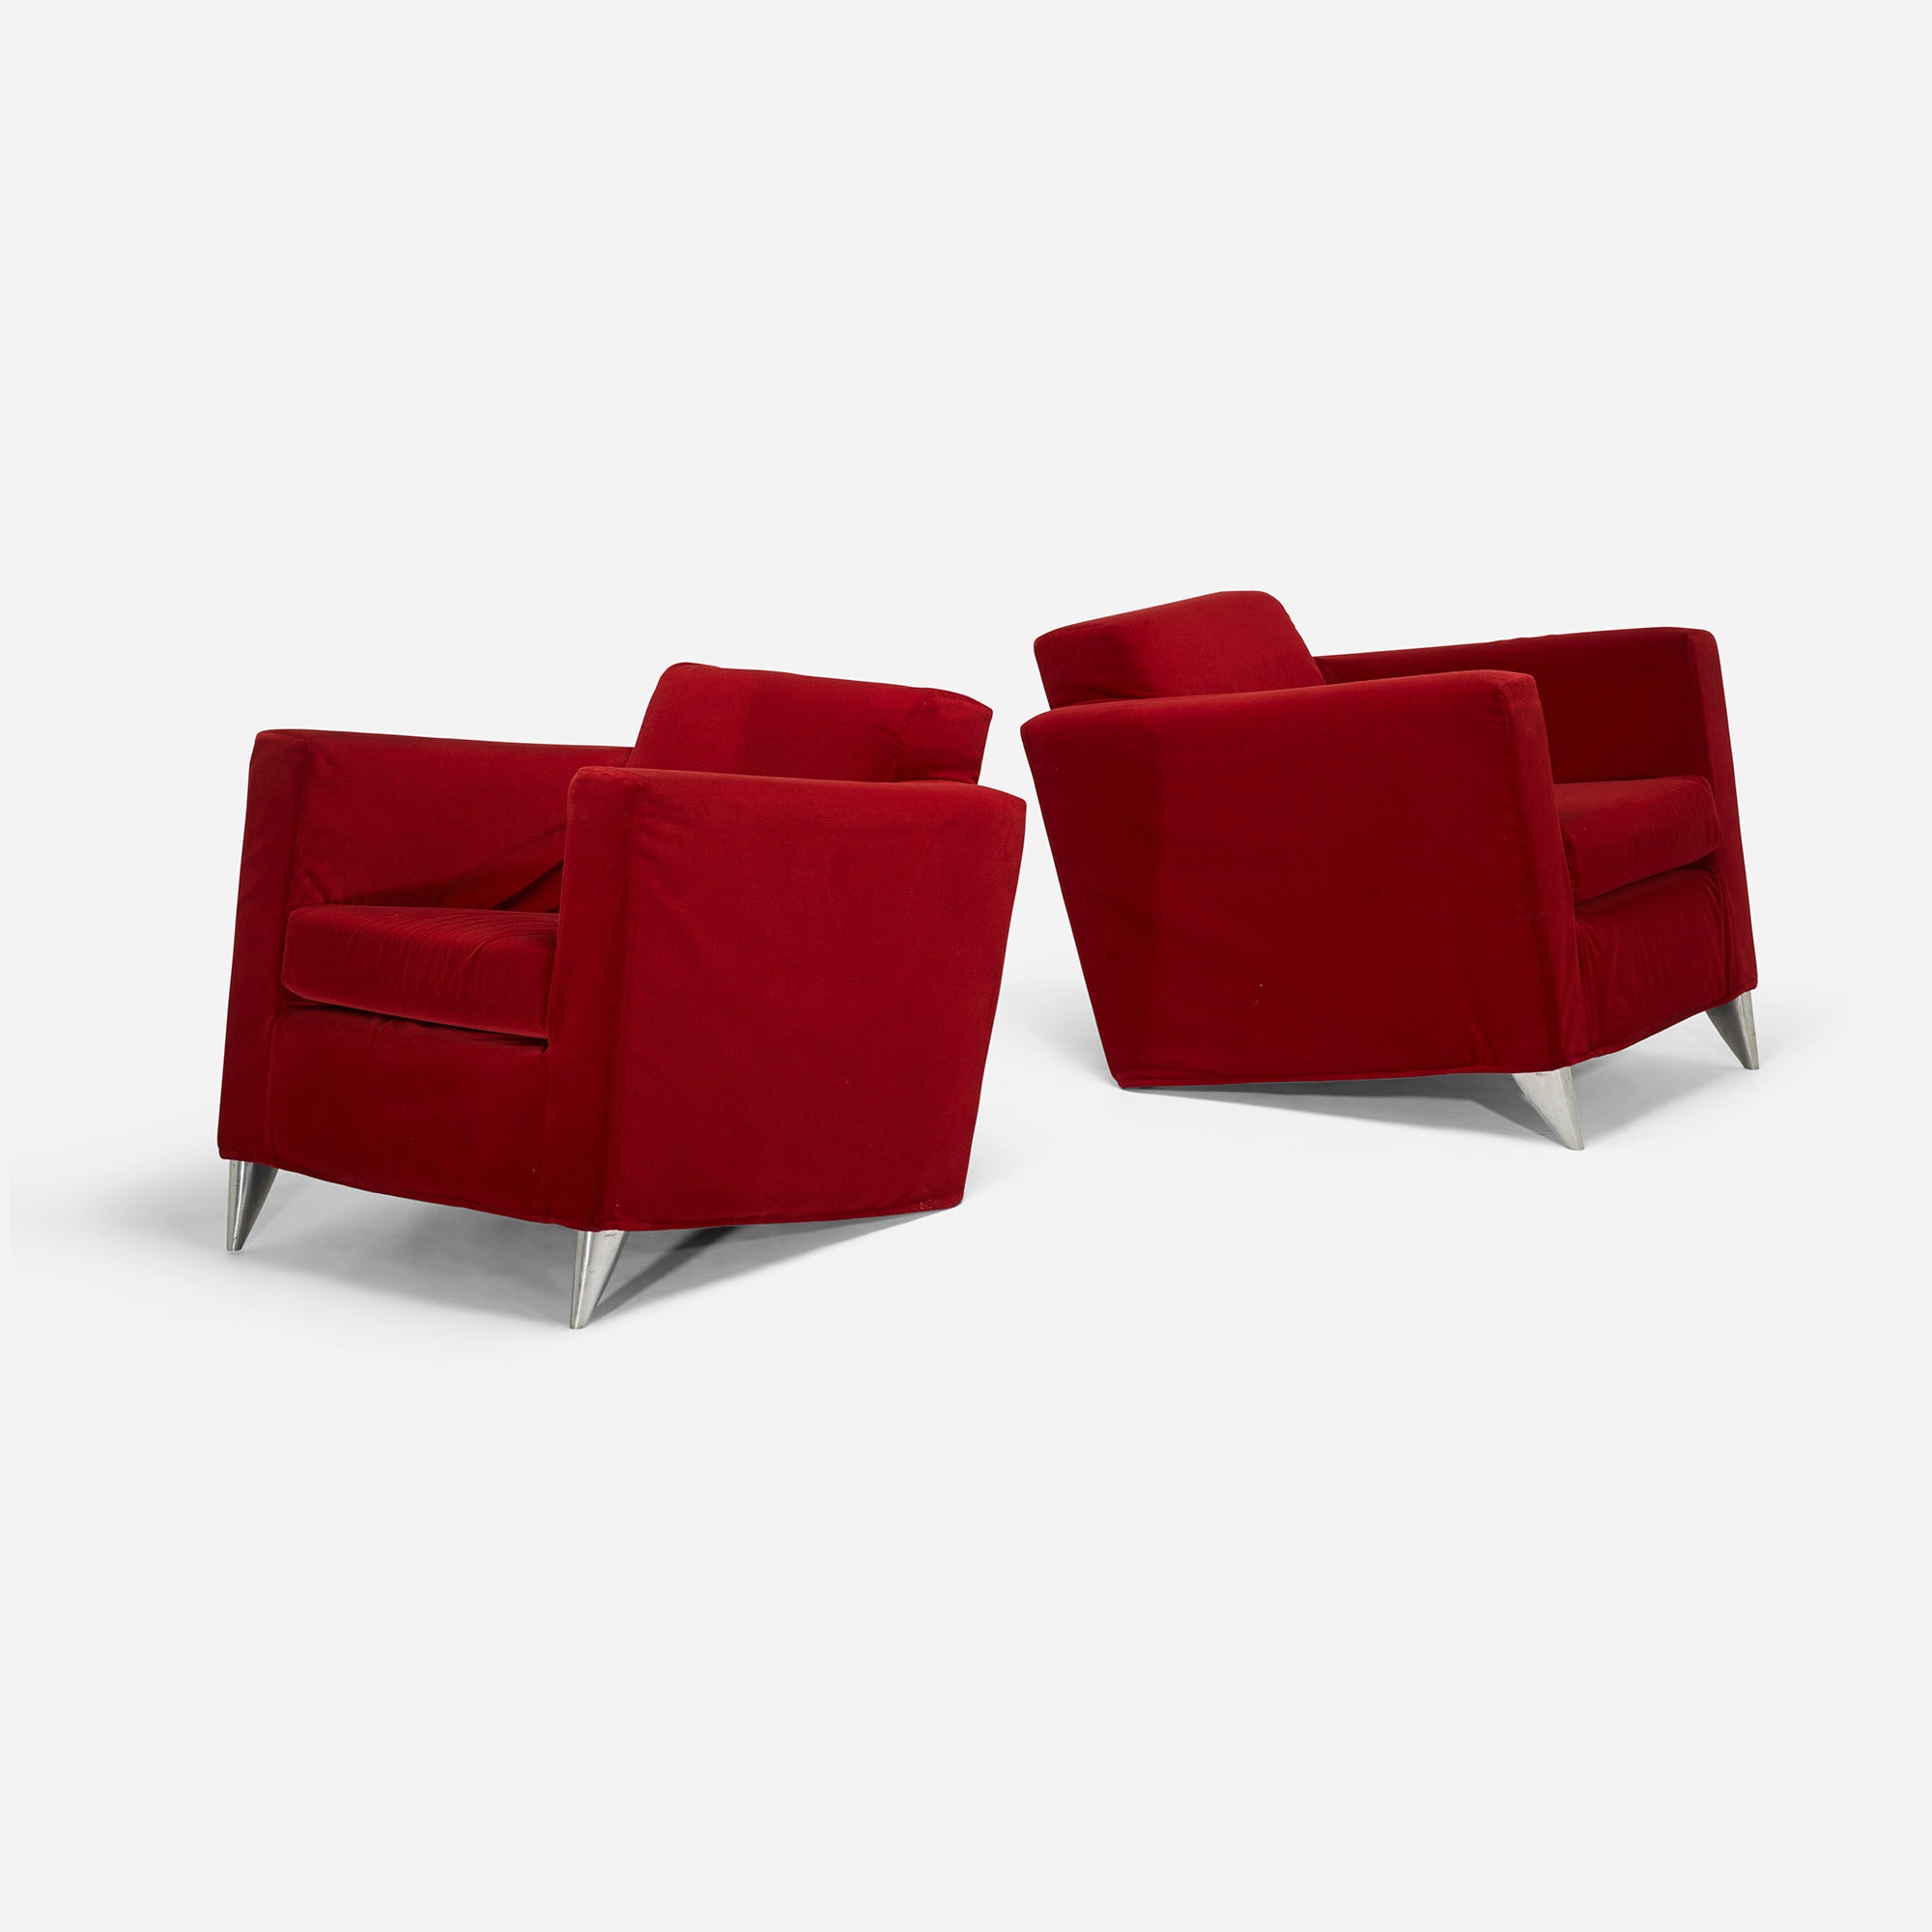 Pair of Len Niggelman lounge chairs by Philippe Starck